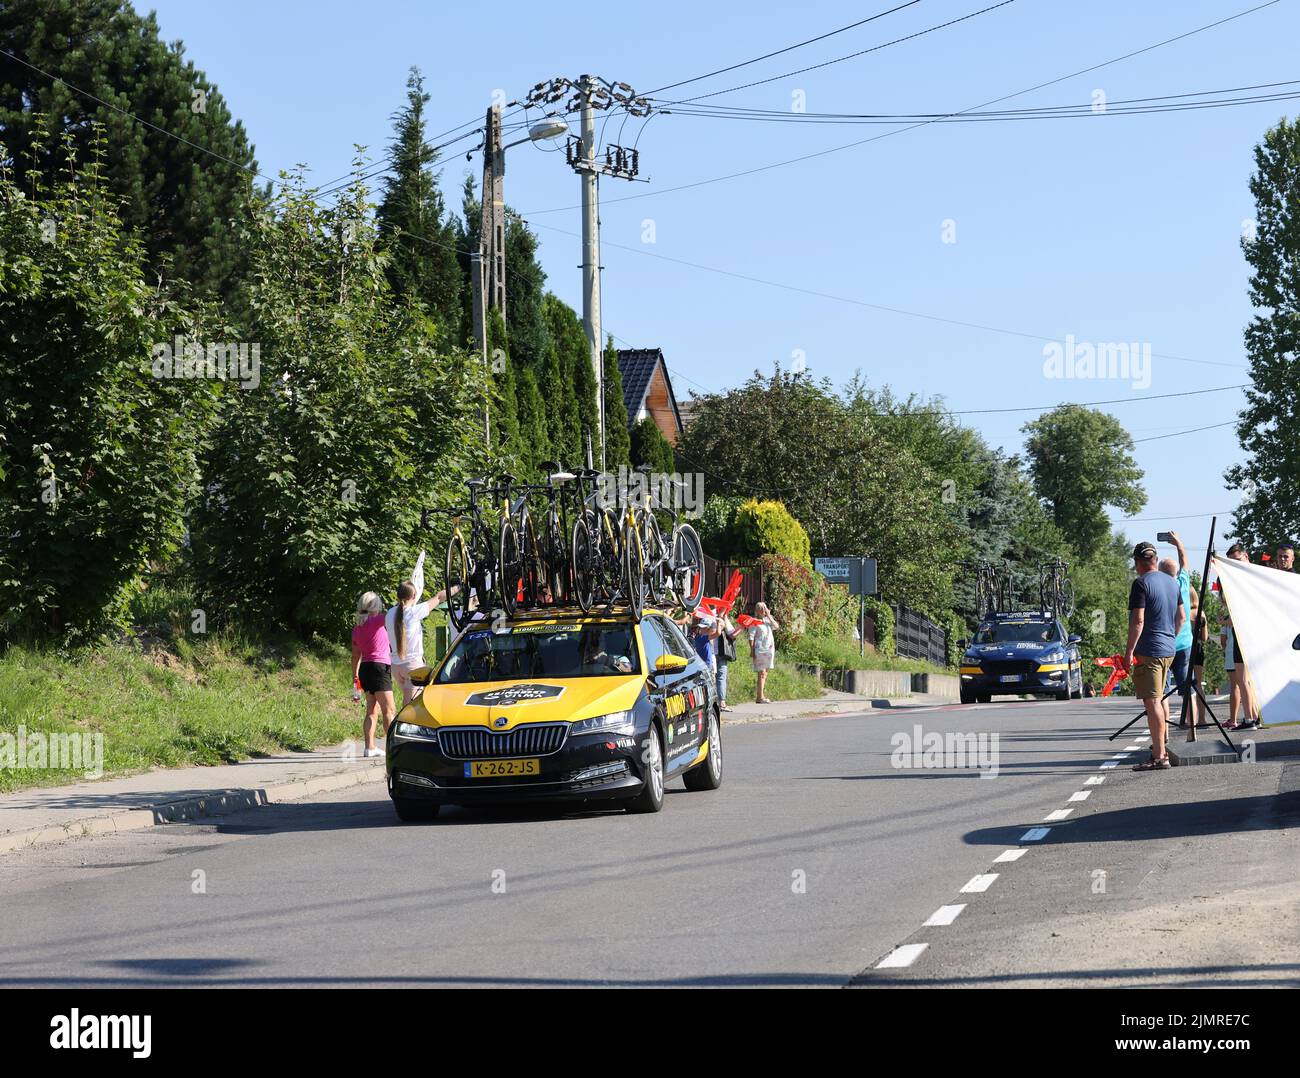 Krakow, Poland - August 5, 2022:  Jumbo Visma Team vehicle on the route of Tour de Pologne UCI – World Tour, stage 7 Skawina - Krakow. The biggest cycling event in Eastern Europe. Stock Photo